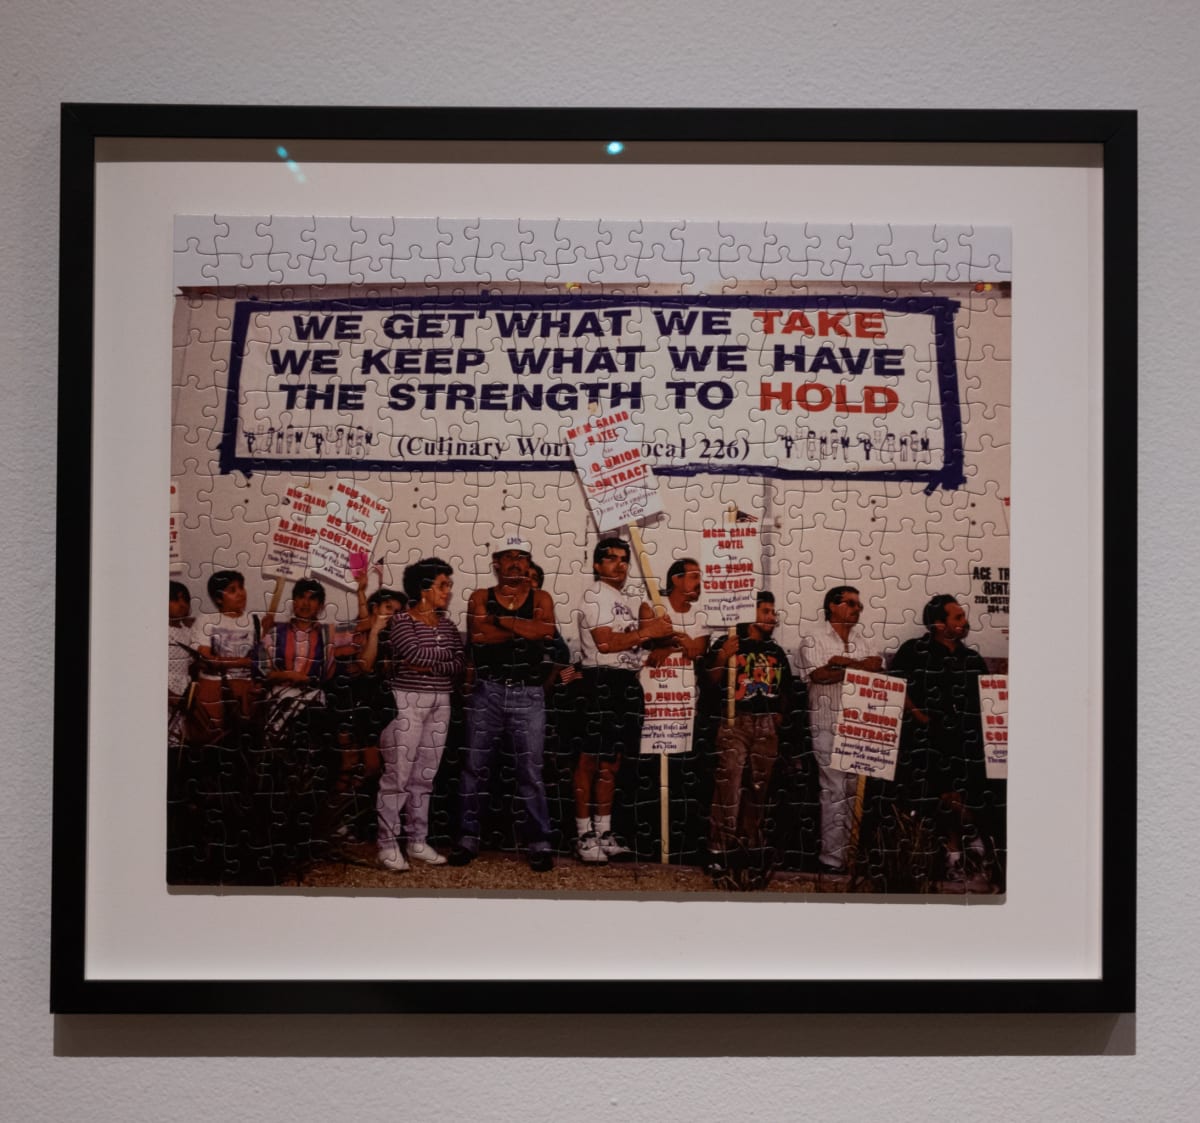 Protest Puzzle, Untitled #2 by Krystal Ramirez  Image: Installation photo by Mikayla Whitmore